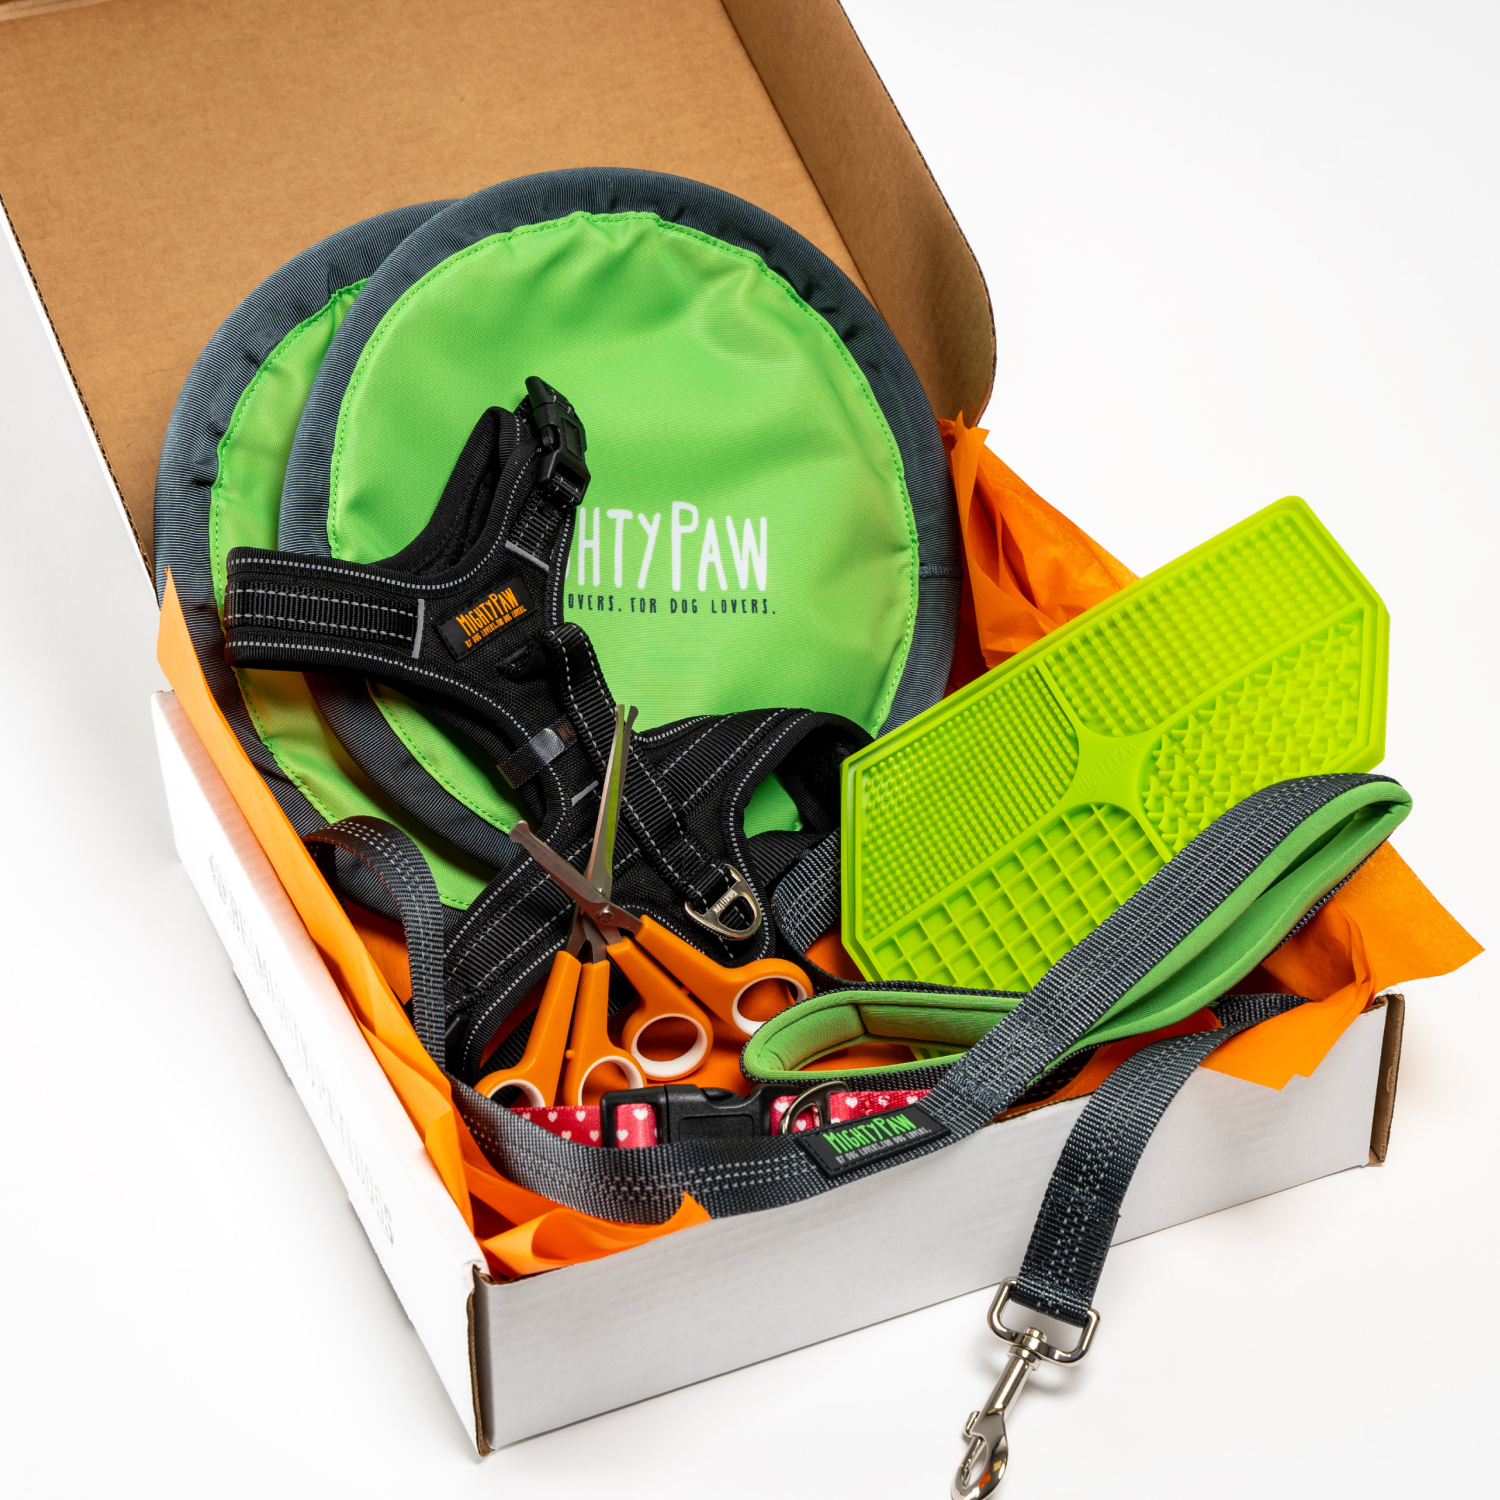 Mighty Paw Mystery Box: Collar, Harness, Leash & More for $30